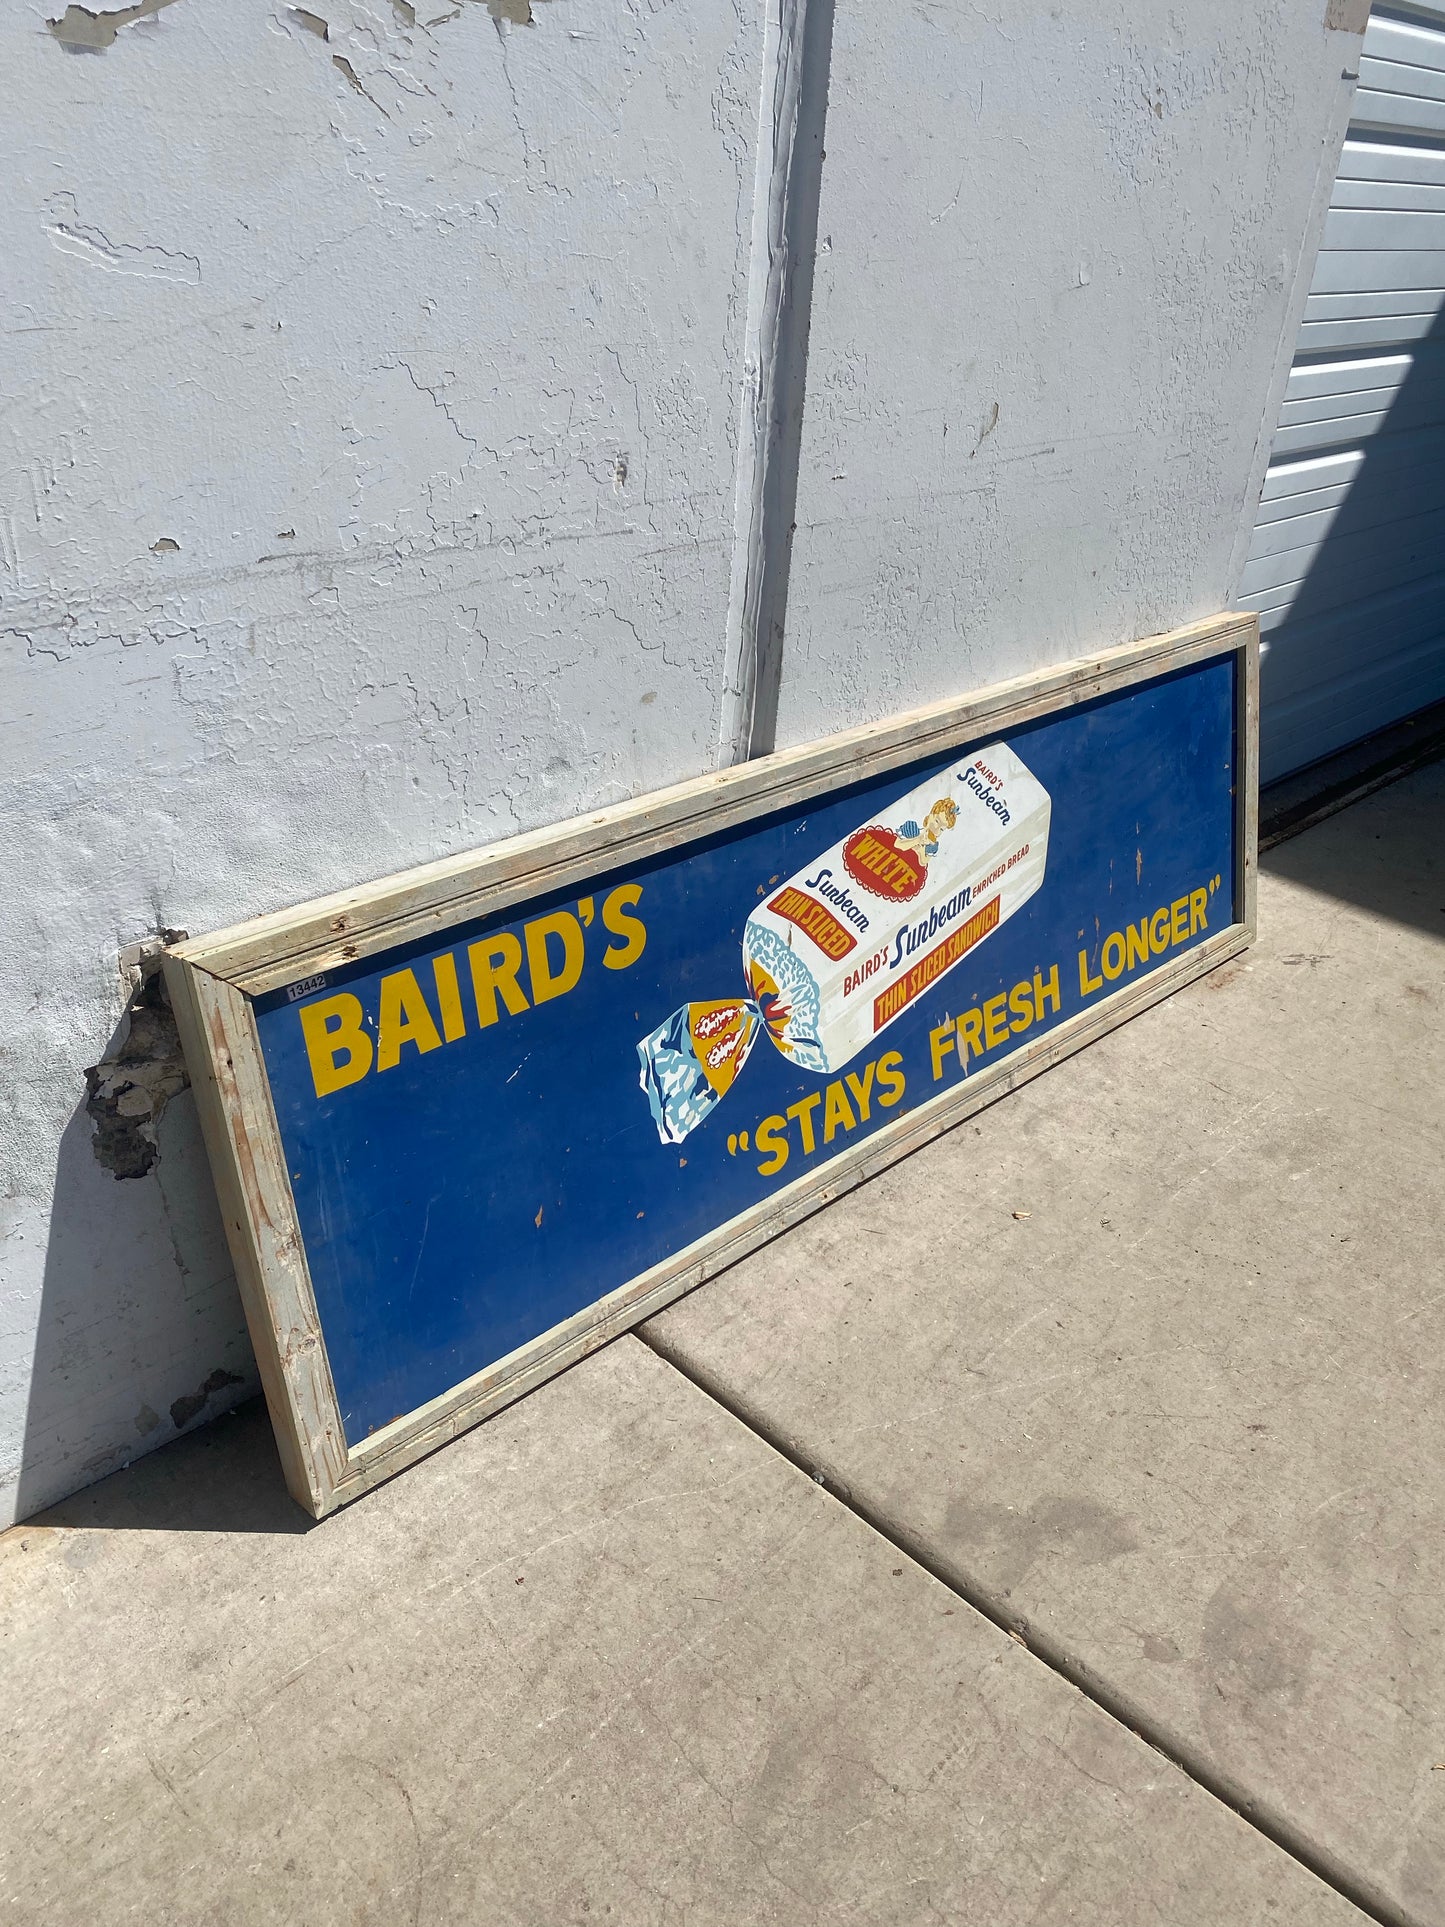 Double-Sided Sign - Baird's Bread / Read Mullen Ford